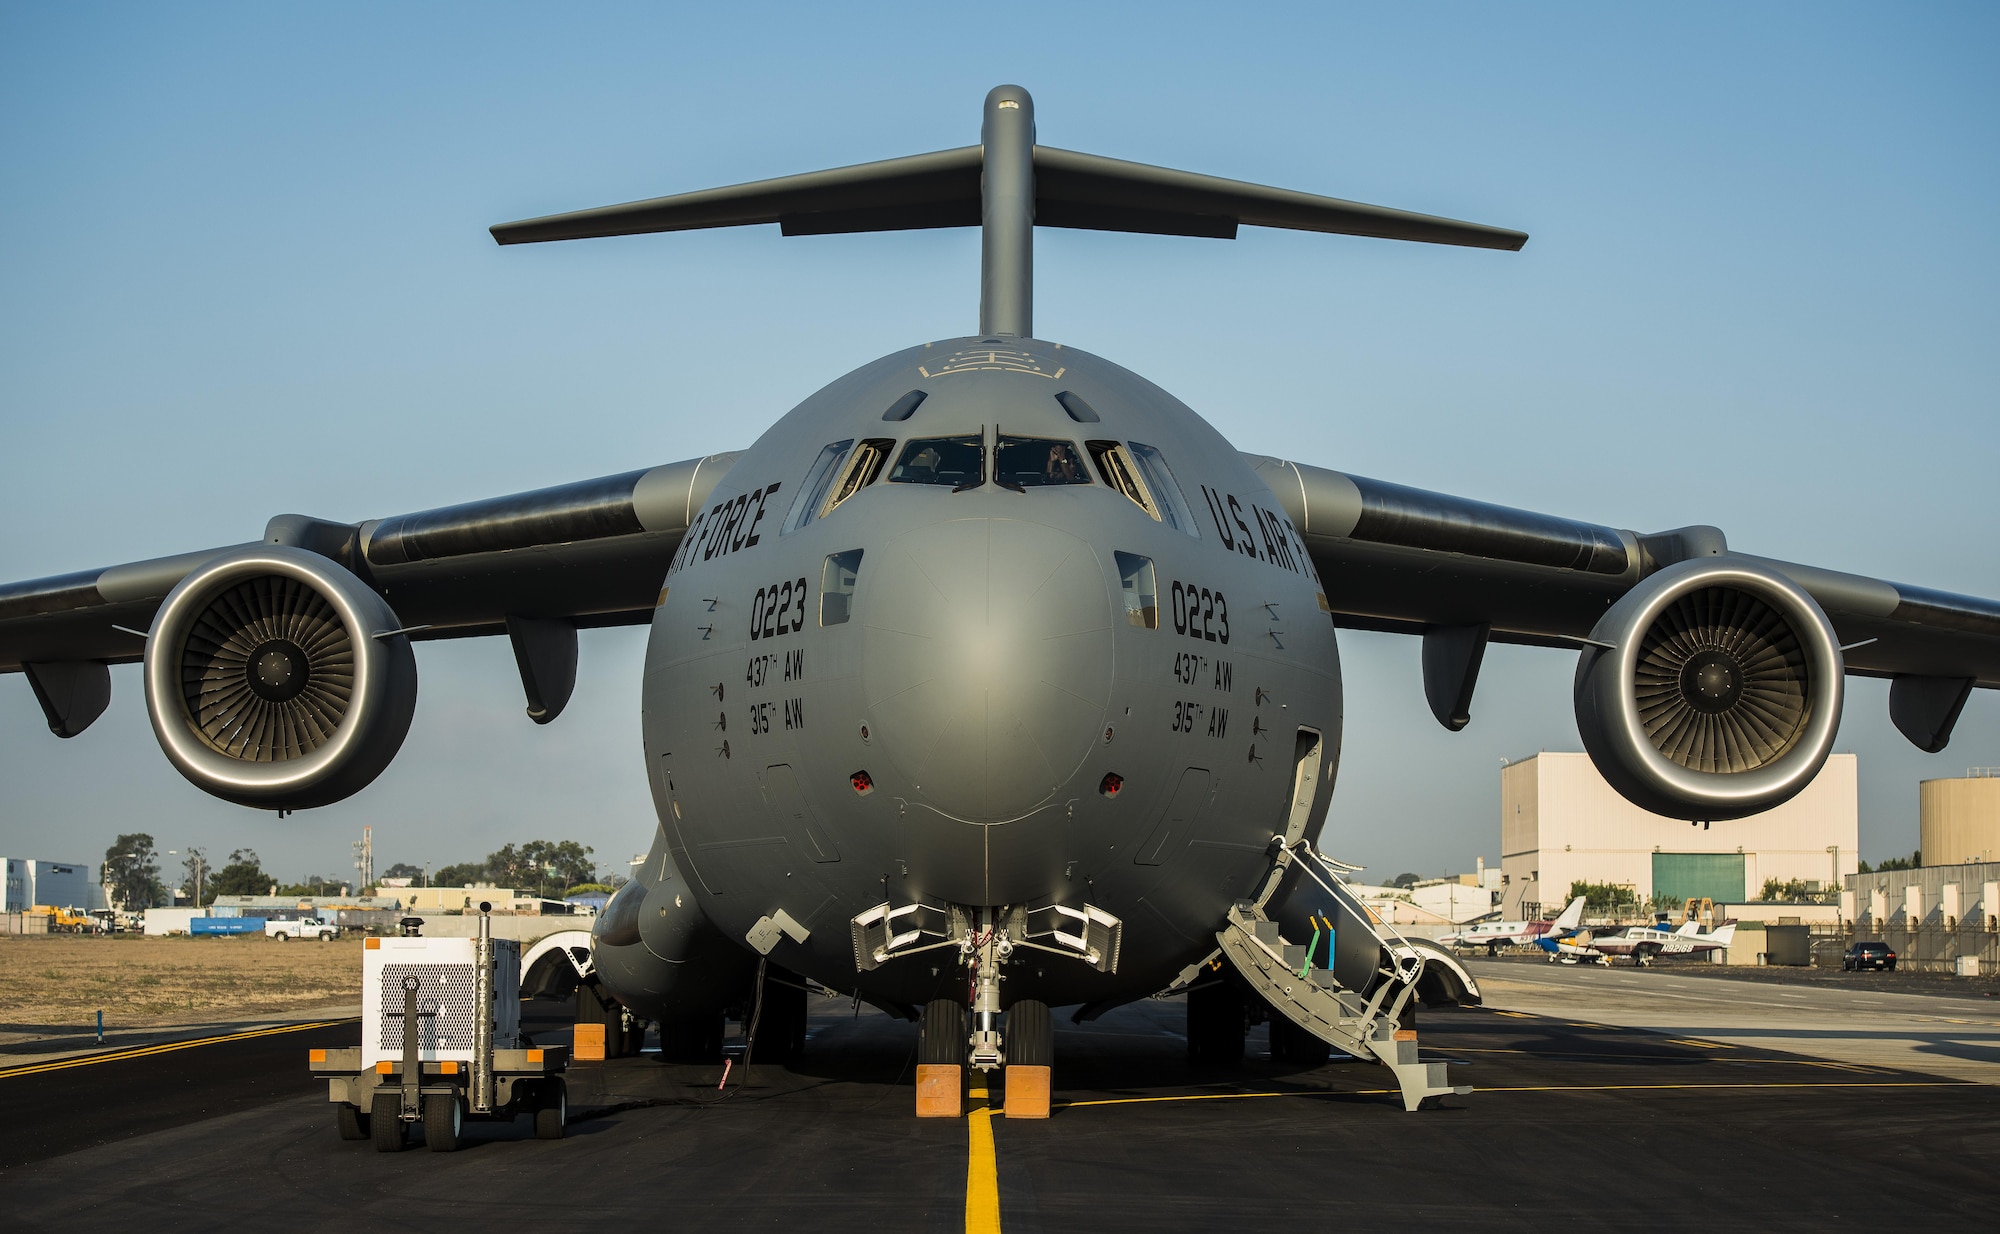 The final U.S. Air Force C-17 Globemaster III, P-223, is rolled off the Boeing assembly line and placed on the flight line during a ceremony celebrating 20 years of delivering C-17s to the U.S. Air Force Sept. 12, 2013, at Long Beach, Calif. 